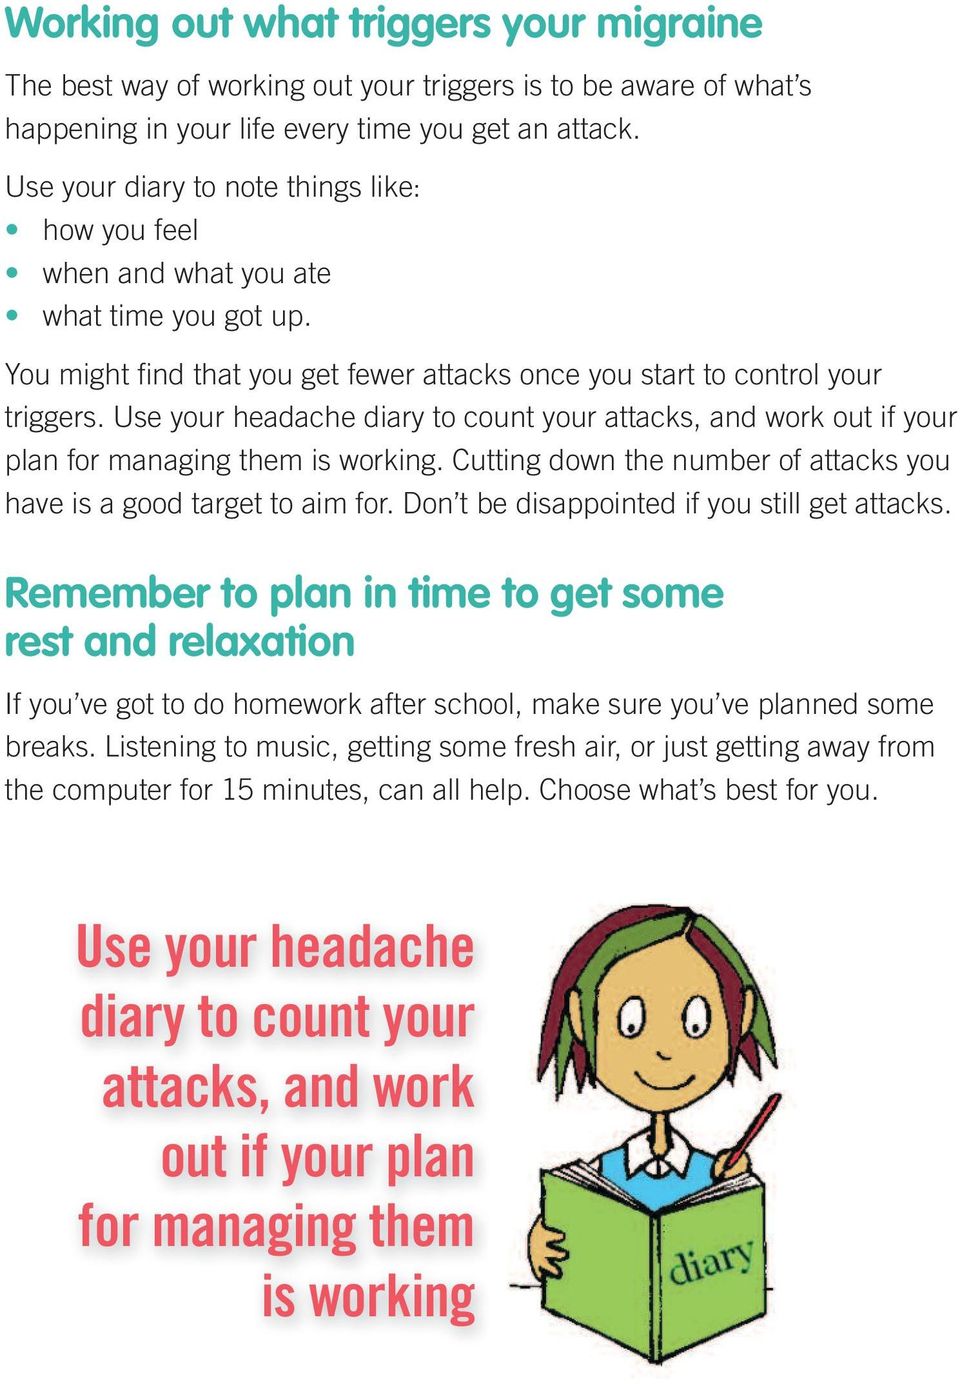 Use your headache diary to count your attacks, and work out if your plan for managing them is working. Cutting down the number of attacks you have is a good target to aim for.